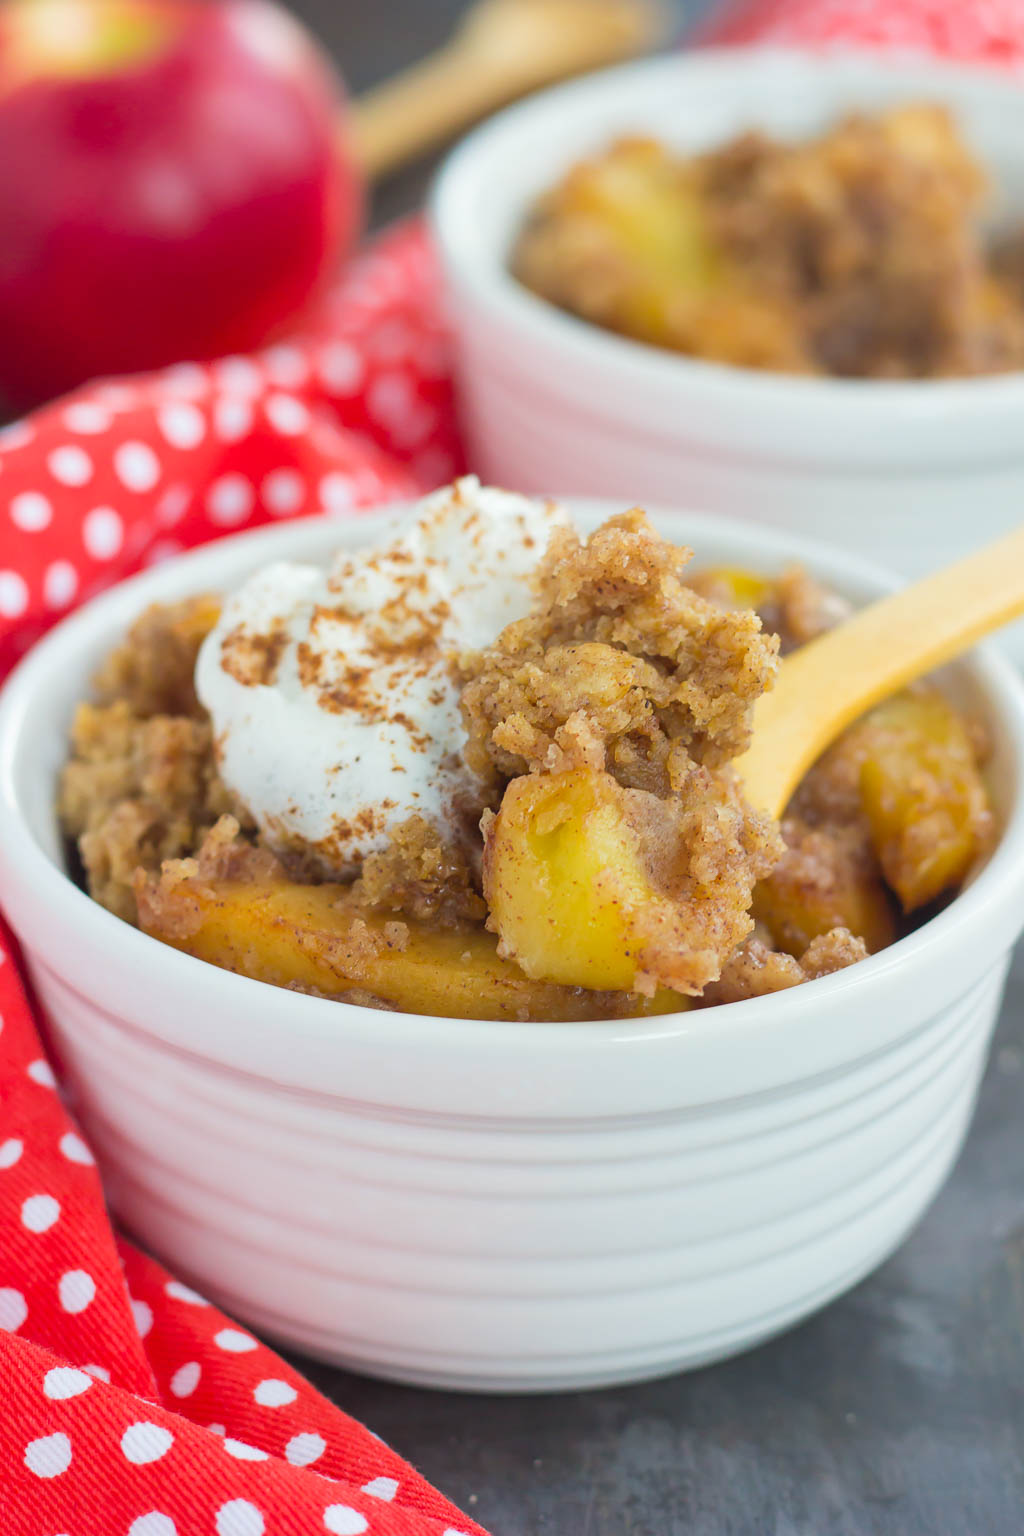 This Slow Cooker Apple Cinnamon Dump Cake is an easy and delicious dessert that captures the flavors of fall. With just six ingredients and hardly any prep time, you can dump everything into your slow cooker and let it work its magic. Filled with tender apples, a sprinkling of cozy spices, and a warm cake topping, this dish is sure to be a dessert winner!